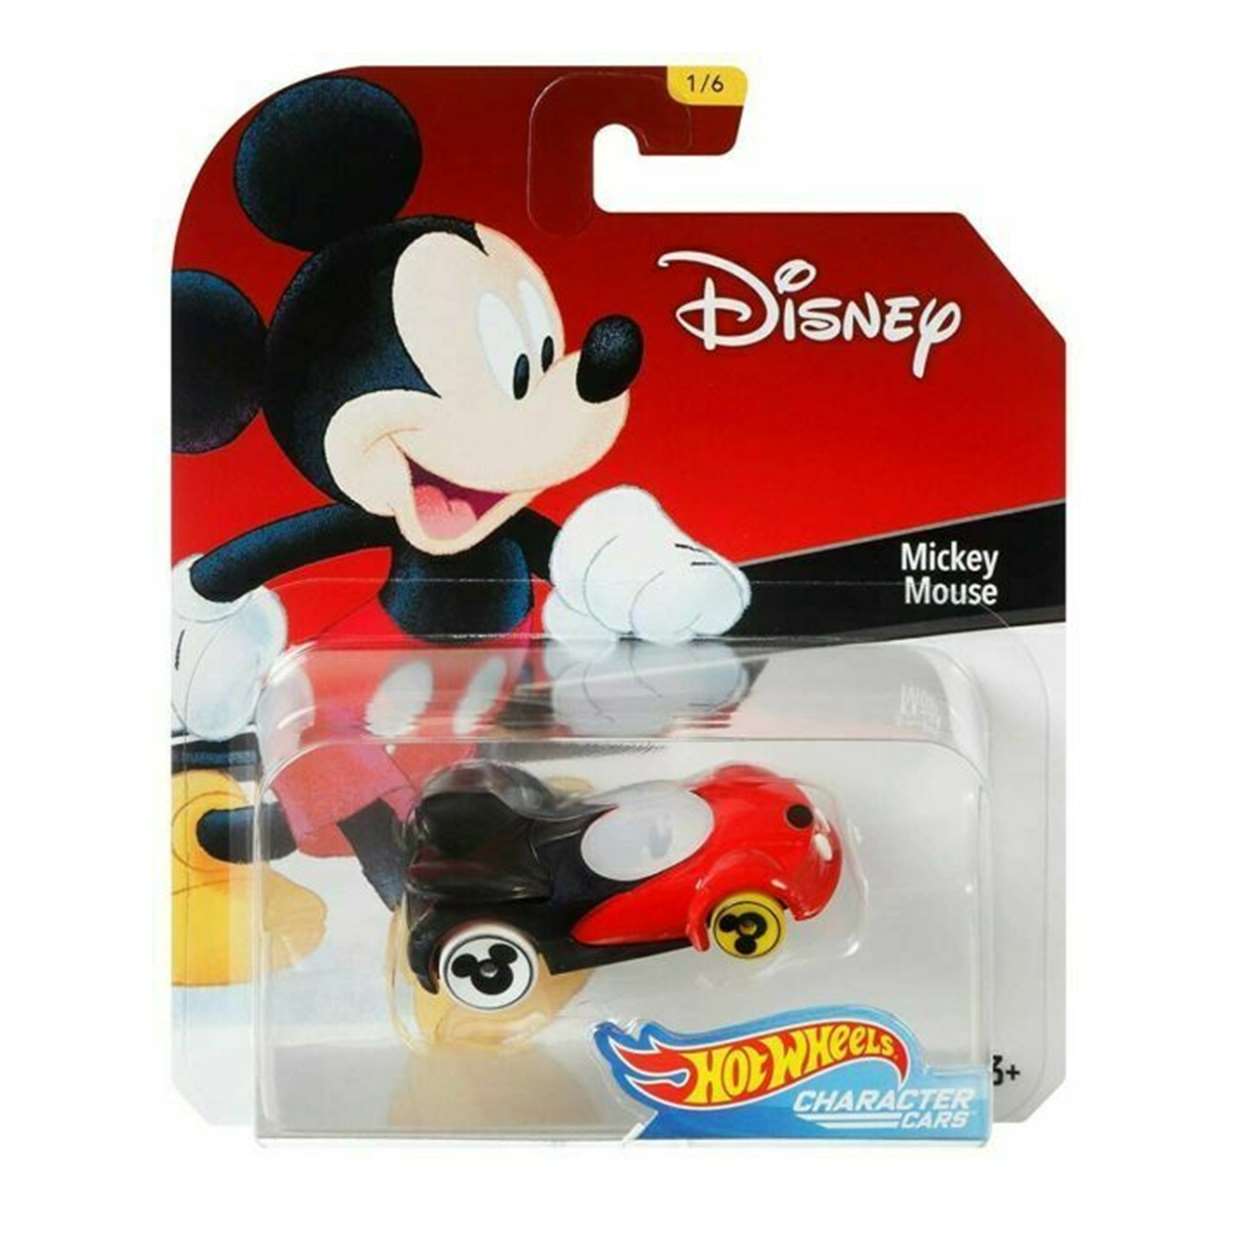 Mickey Mouse 1/6 Hot Wheels Disney Character Cars